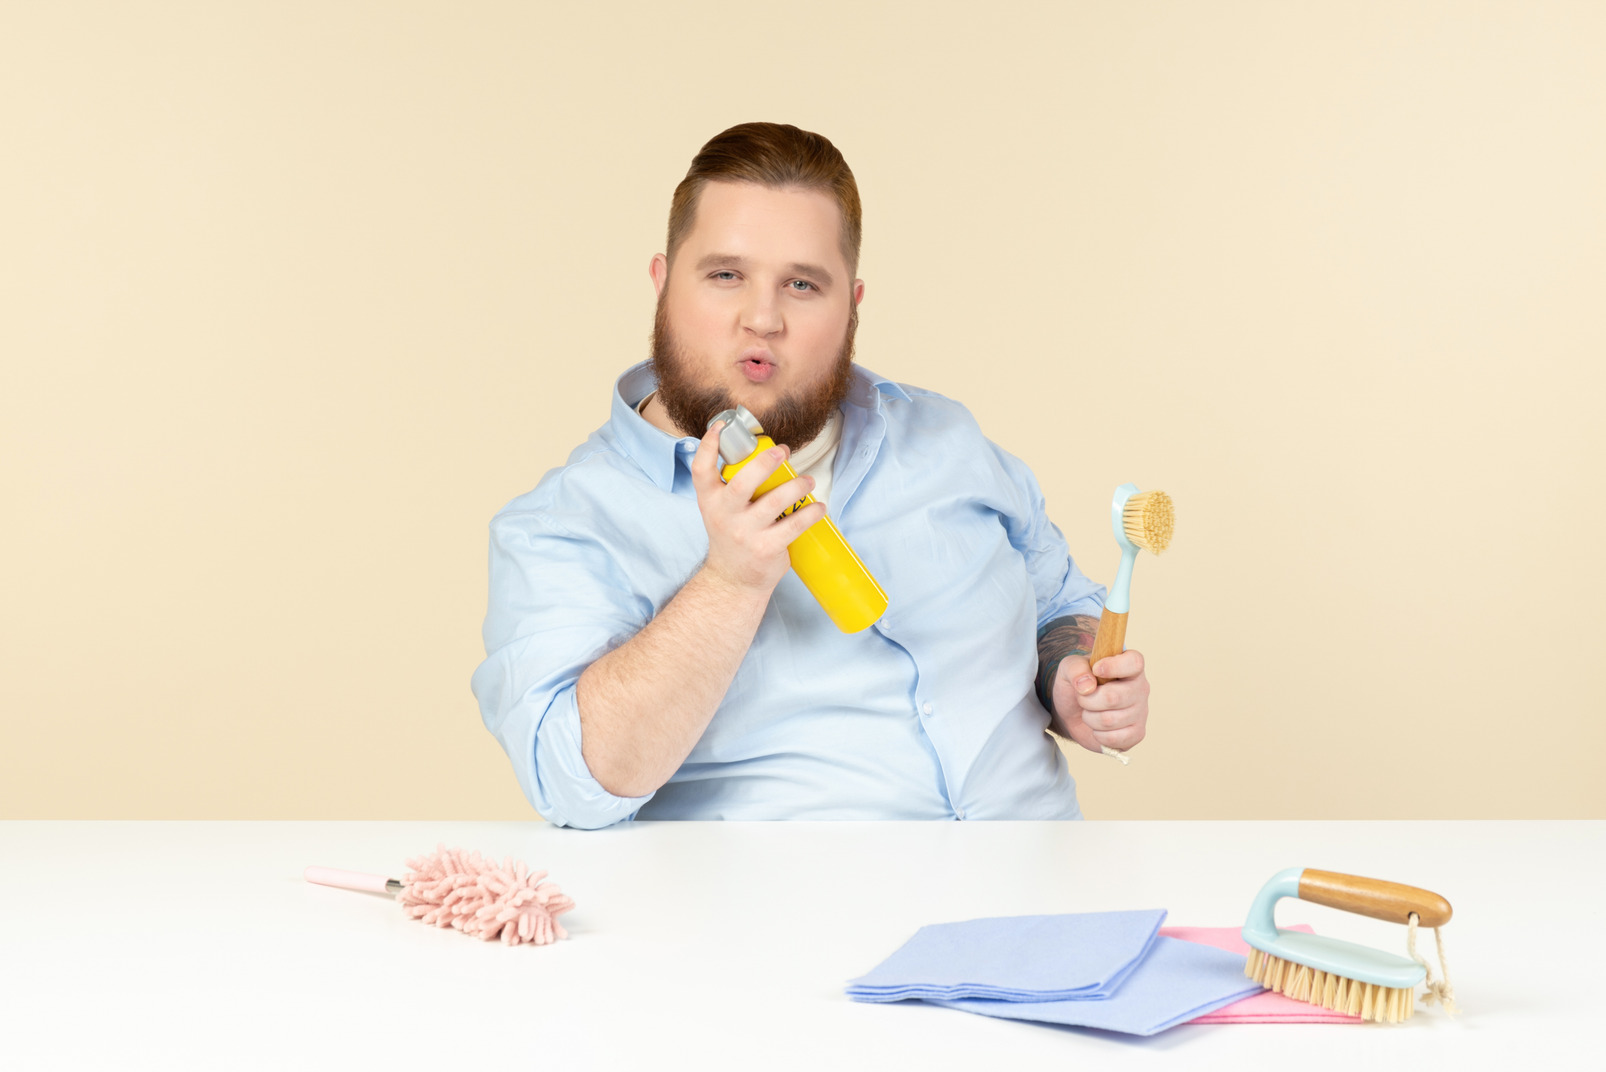 Contented young overweight man sitting at the table and holding cleaning tools